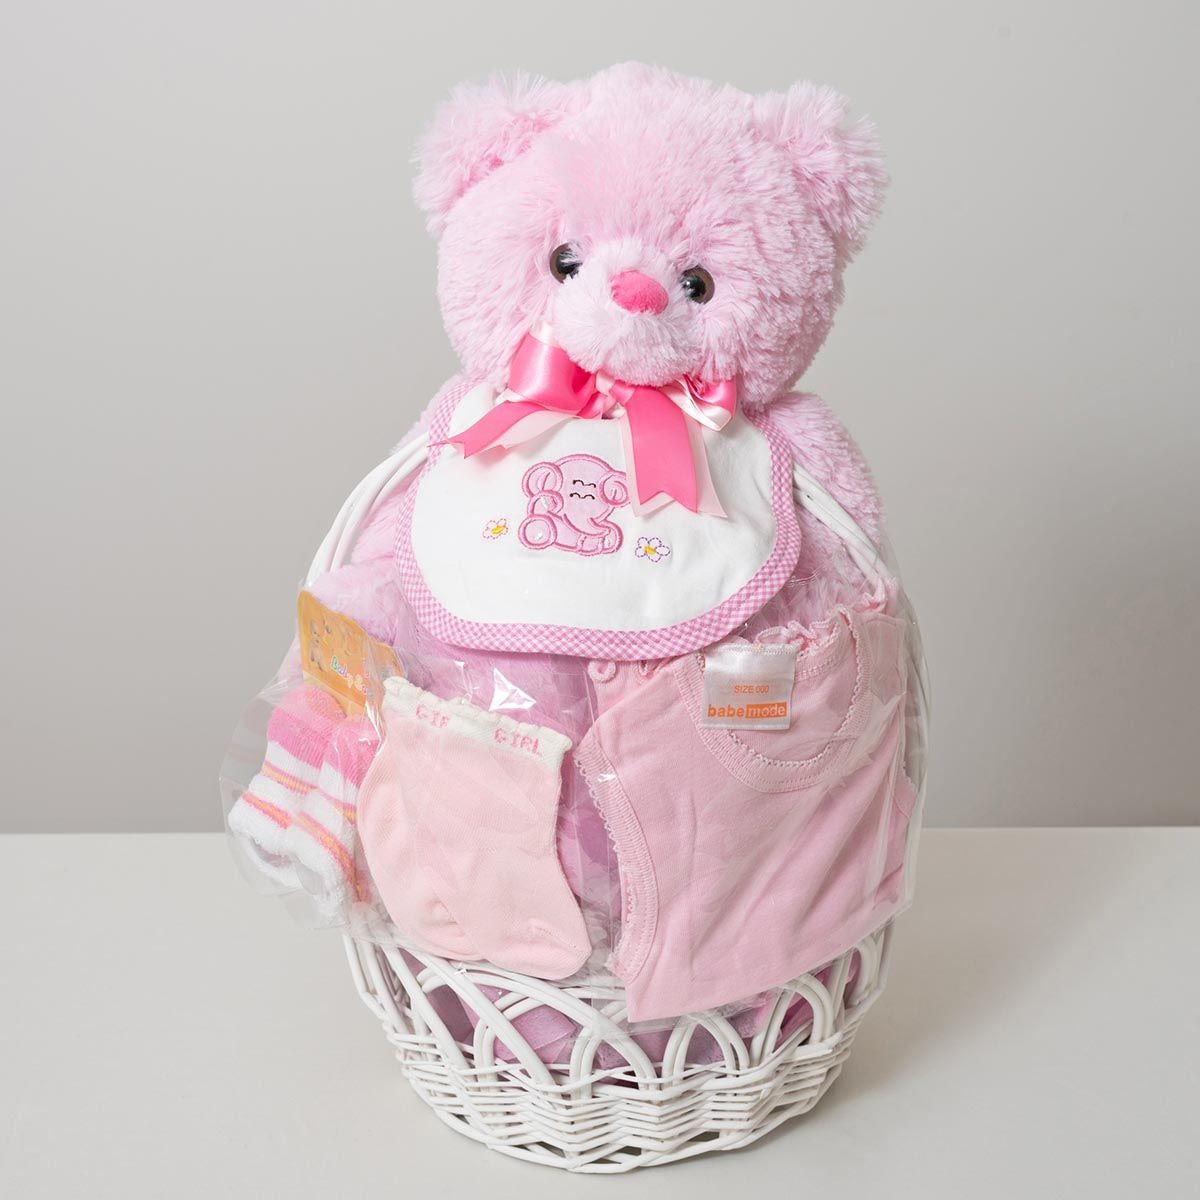 Teddy Baby Product Hamper Pink Classic